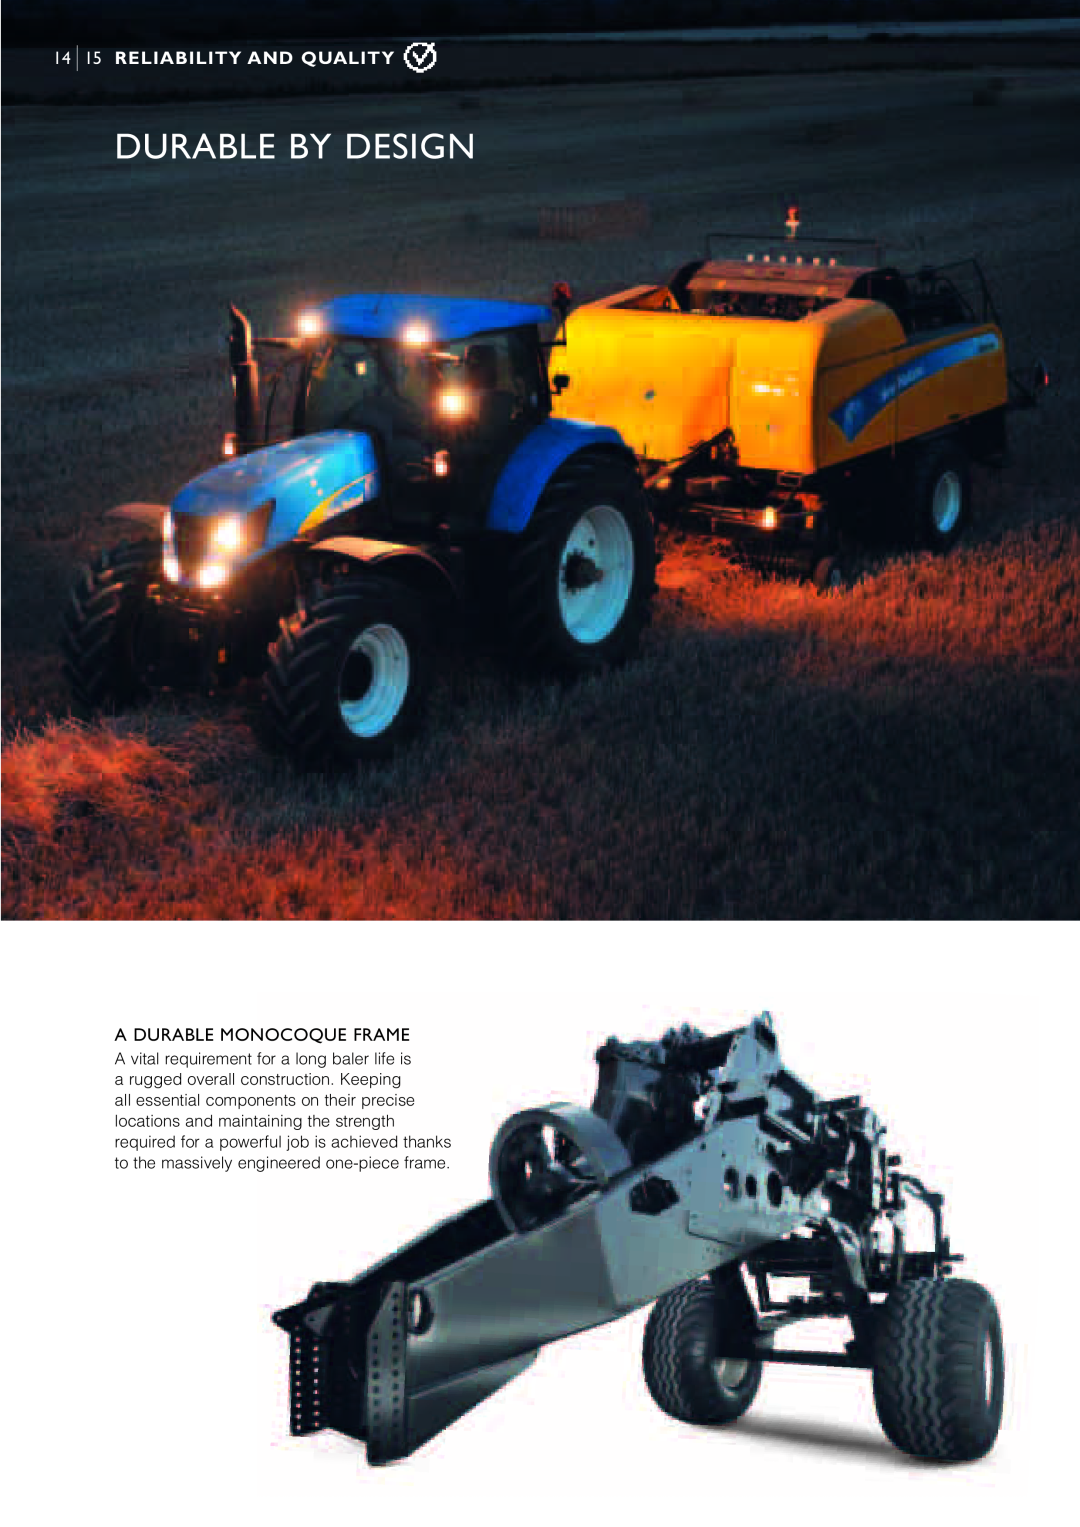 New Holland BB9O8O, BB9O6O, BB9OOO manual A Durable Monocoque Frame, Durable By Design, Reliability And Quality 